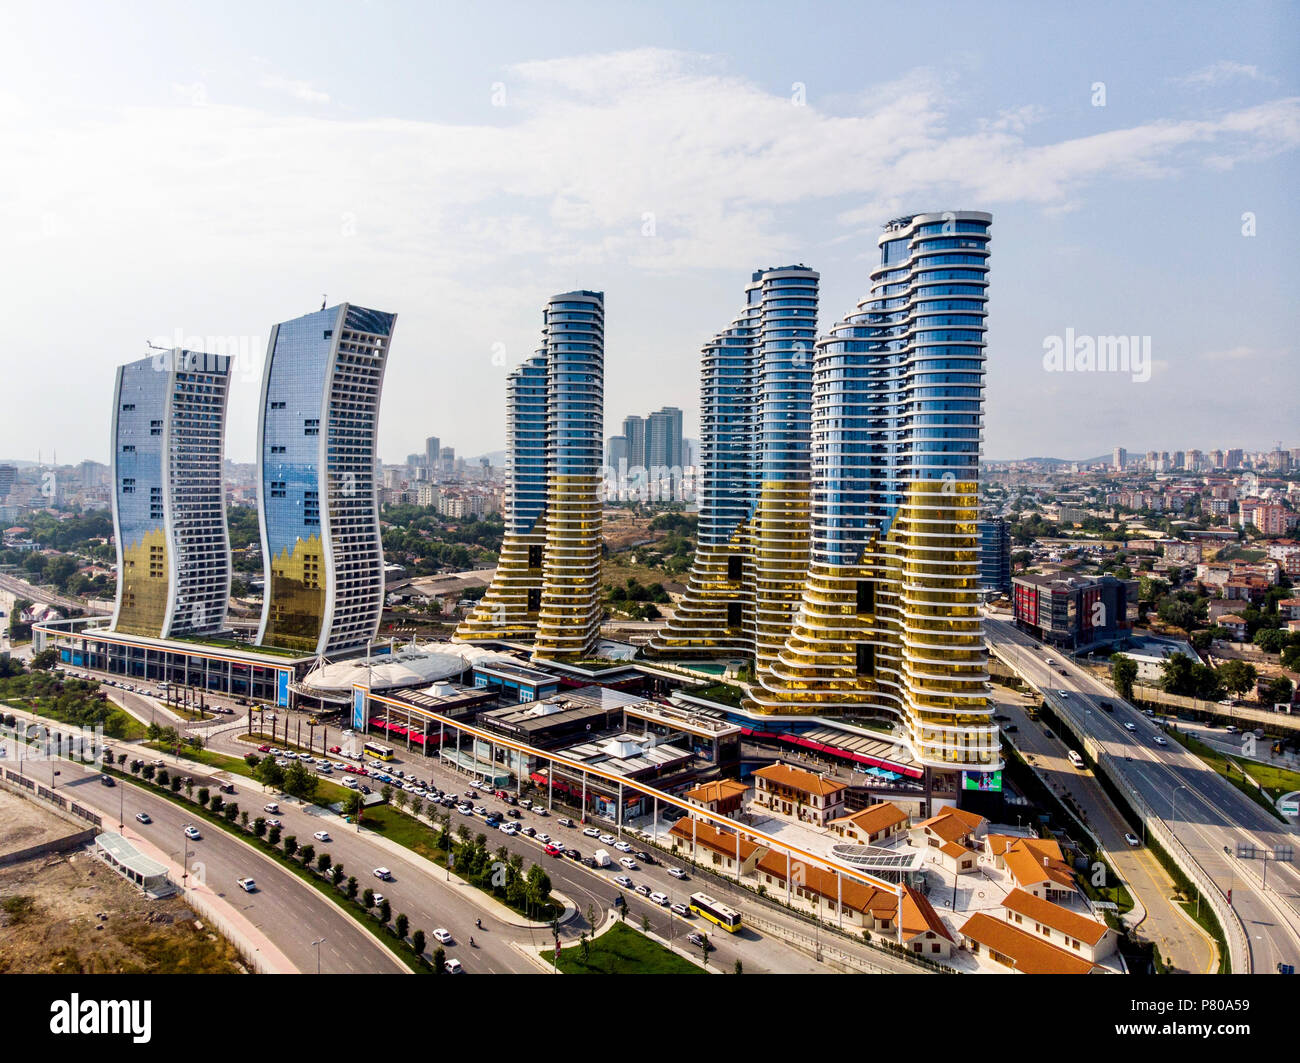 istanbul turkey february 23 2018 aerial drone view of istmarina skyscrapers avm shopping mall in istanbul kartal architectural concept stock photo alamy